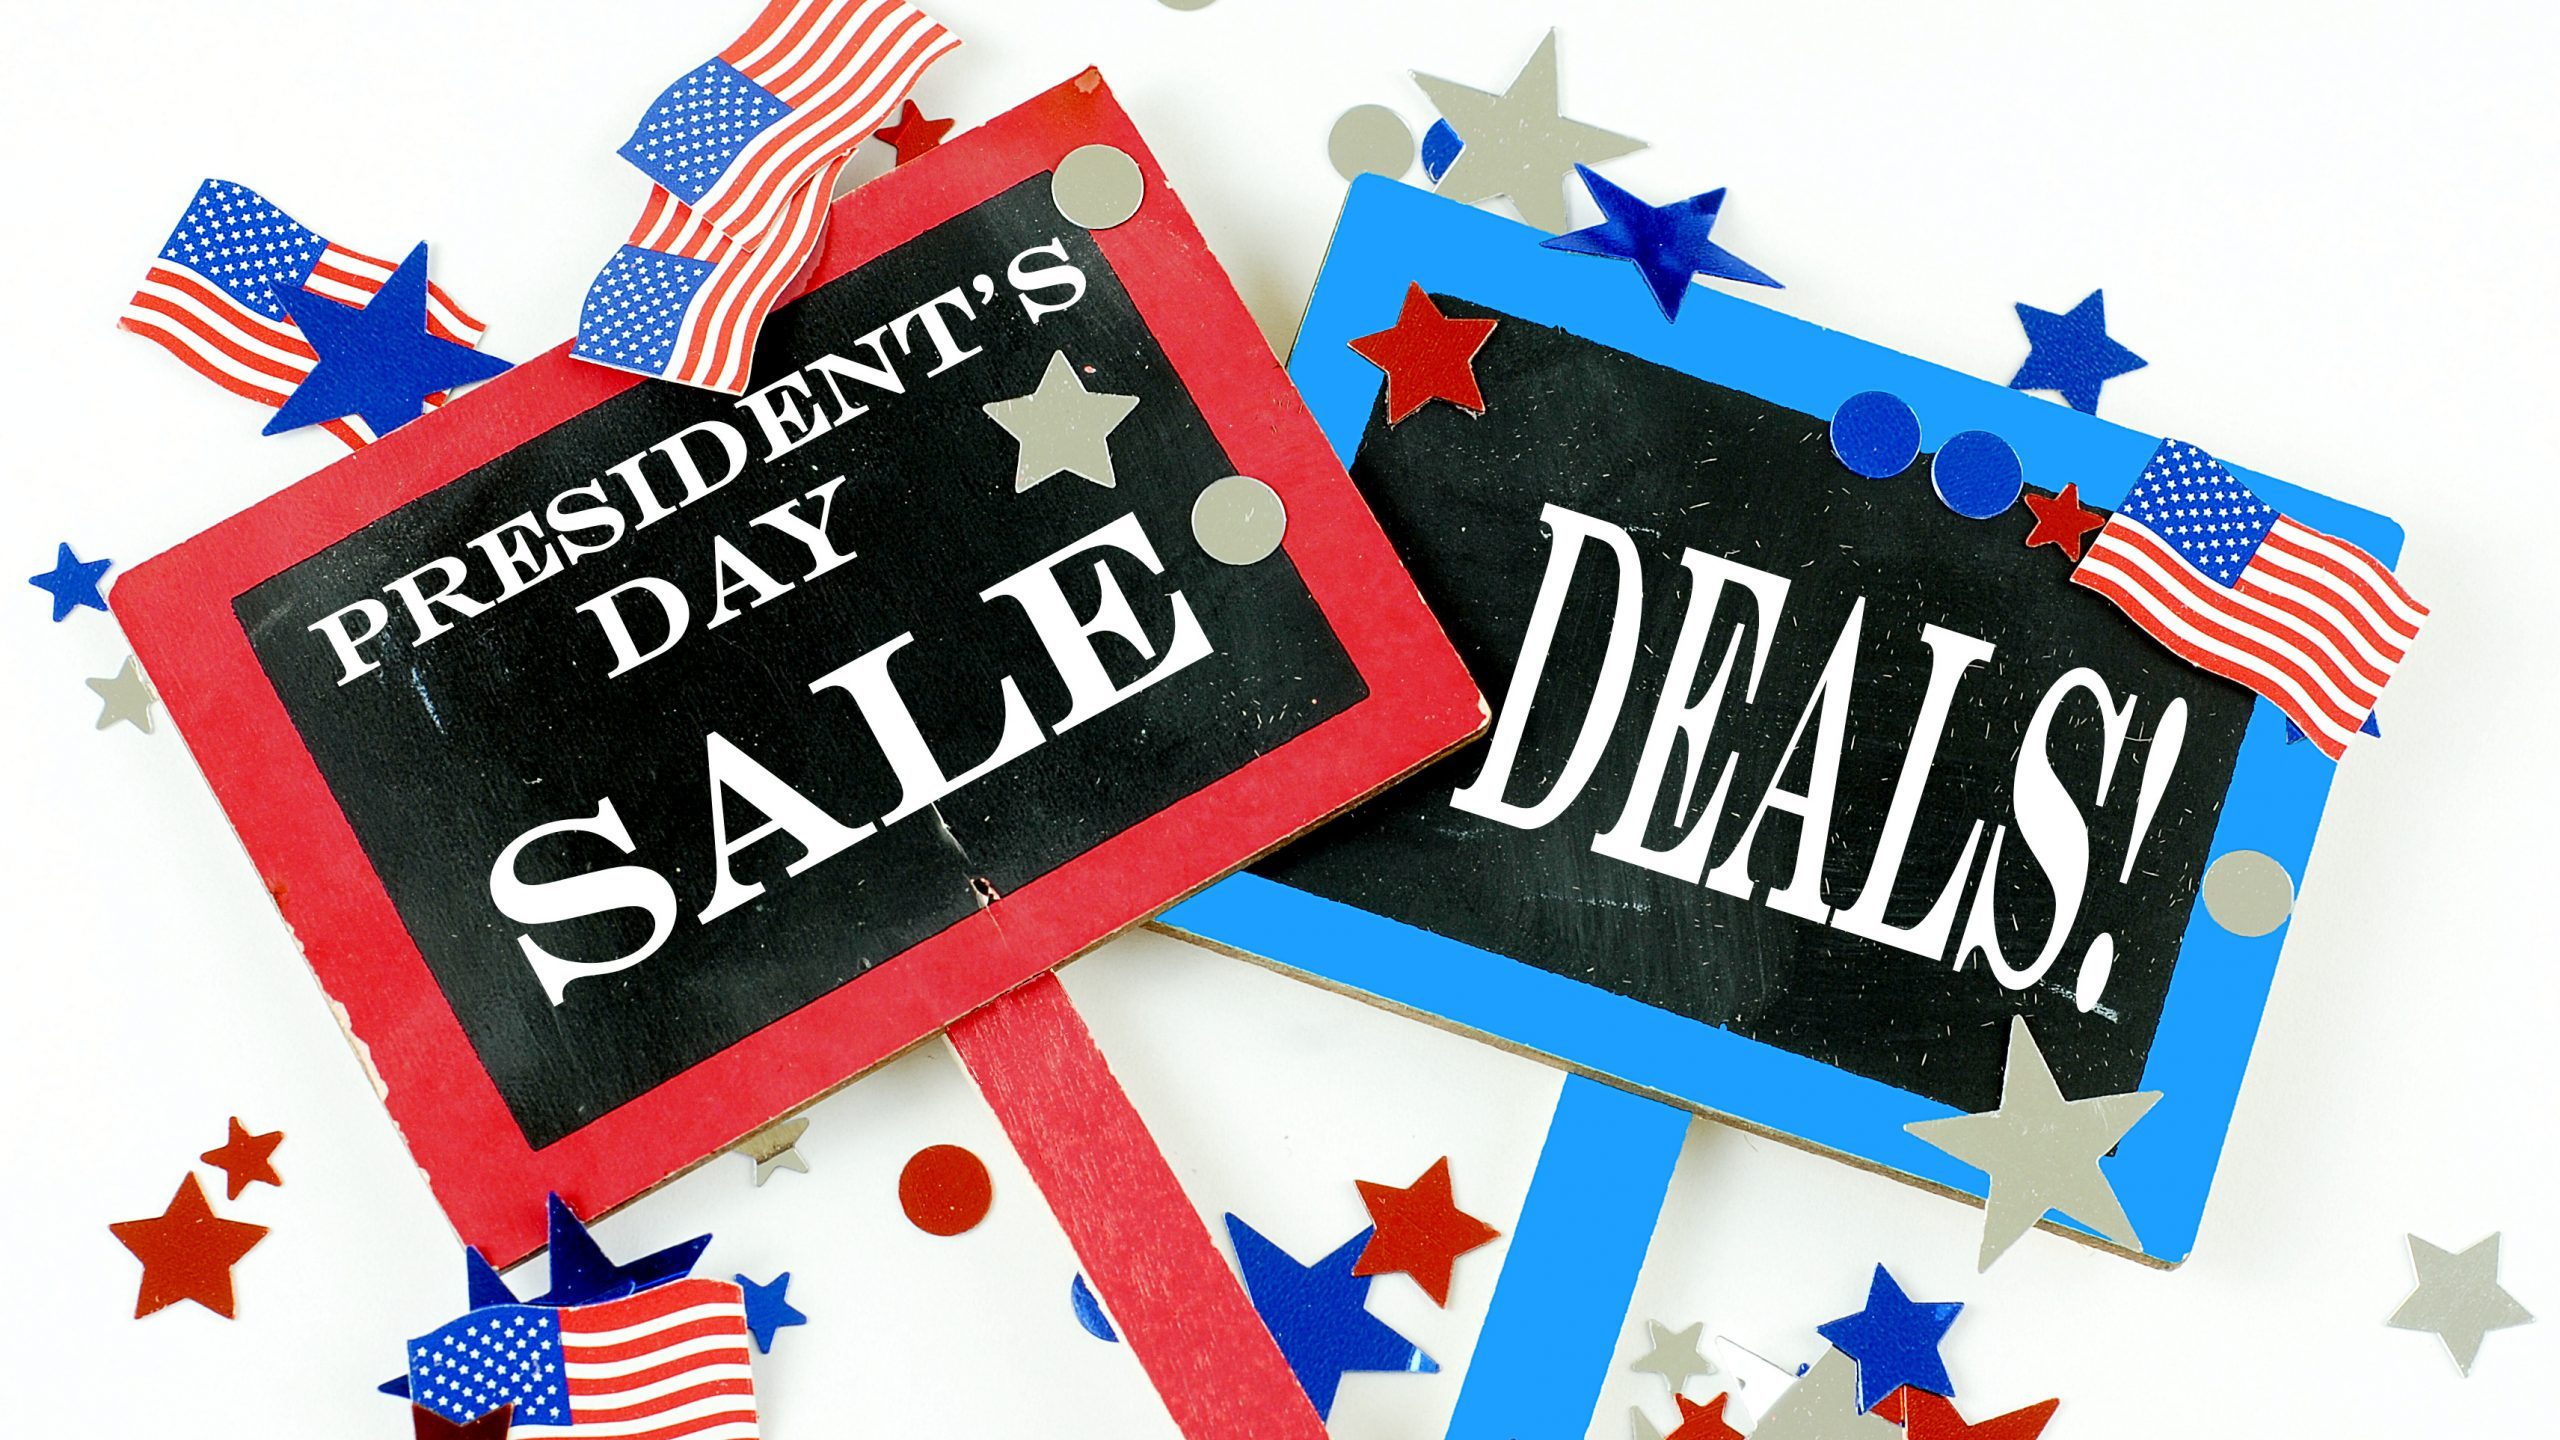 10 Presidents Day sales to shop this weekend